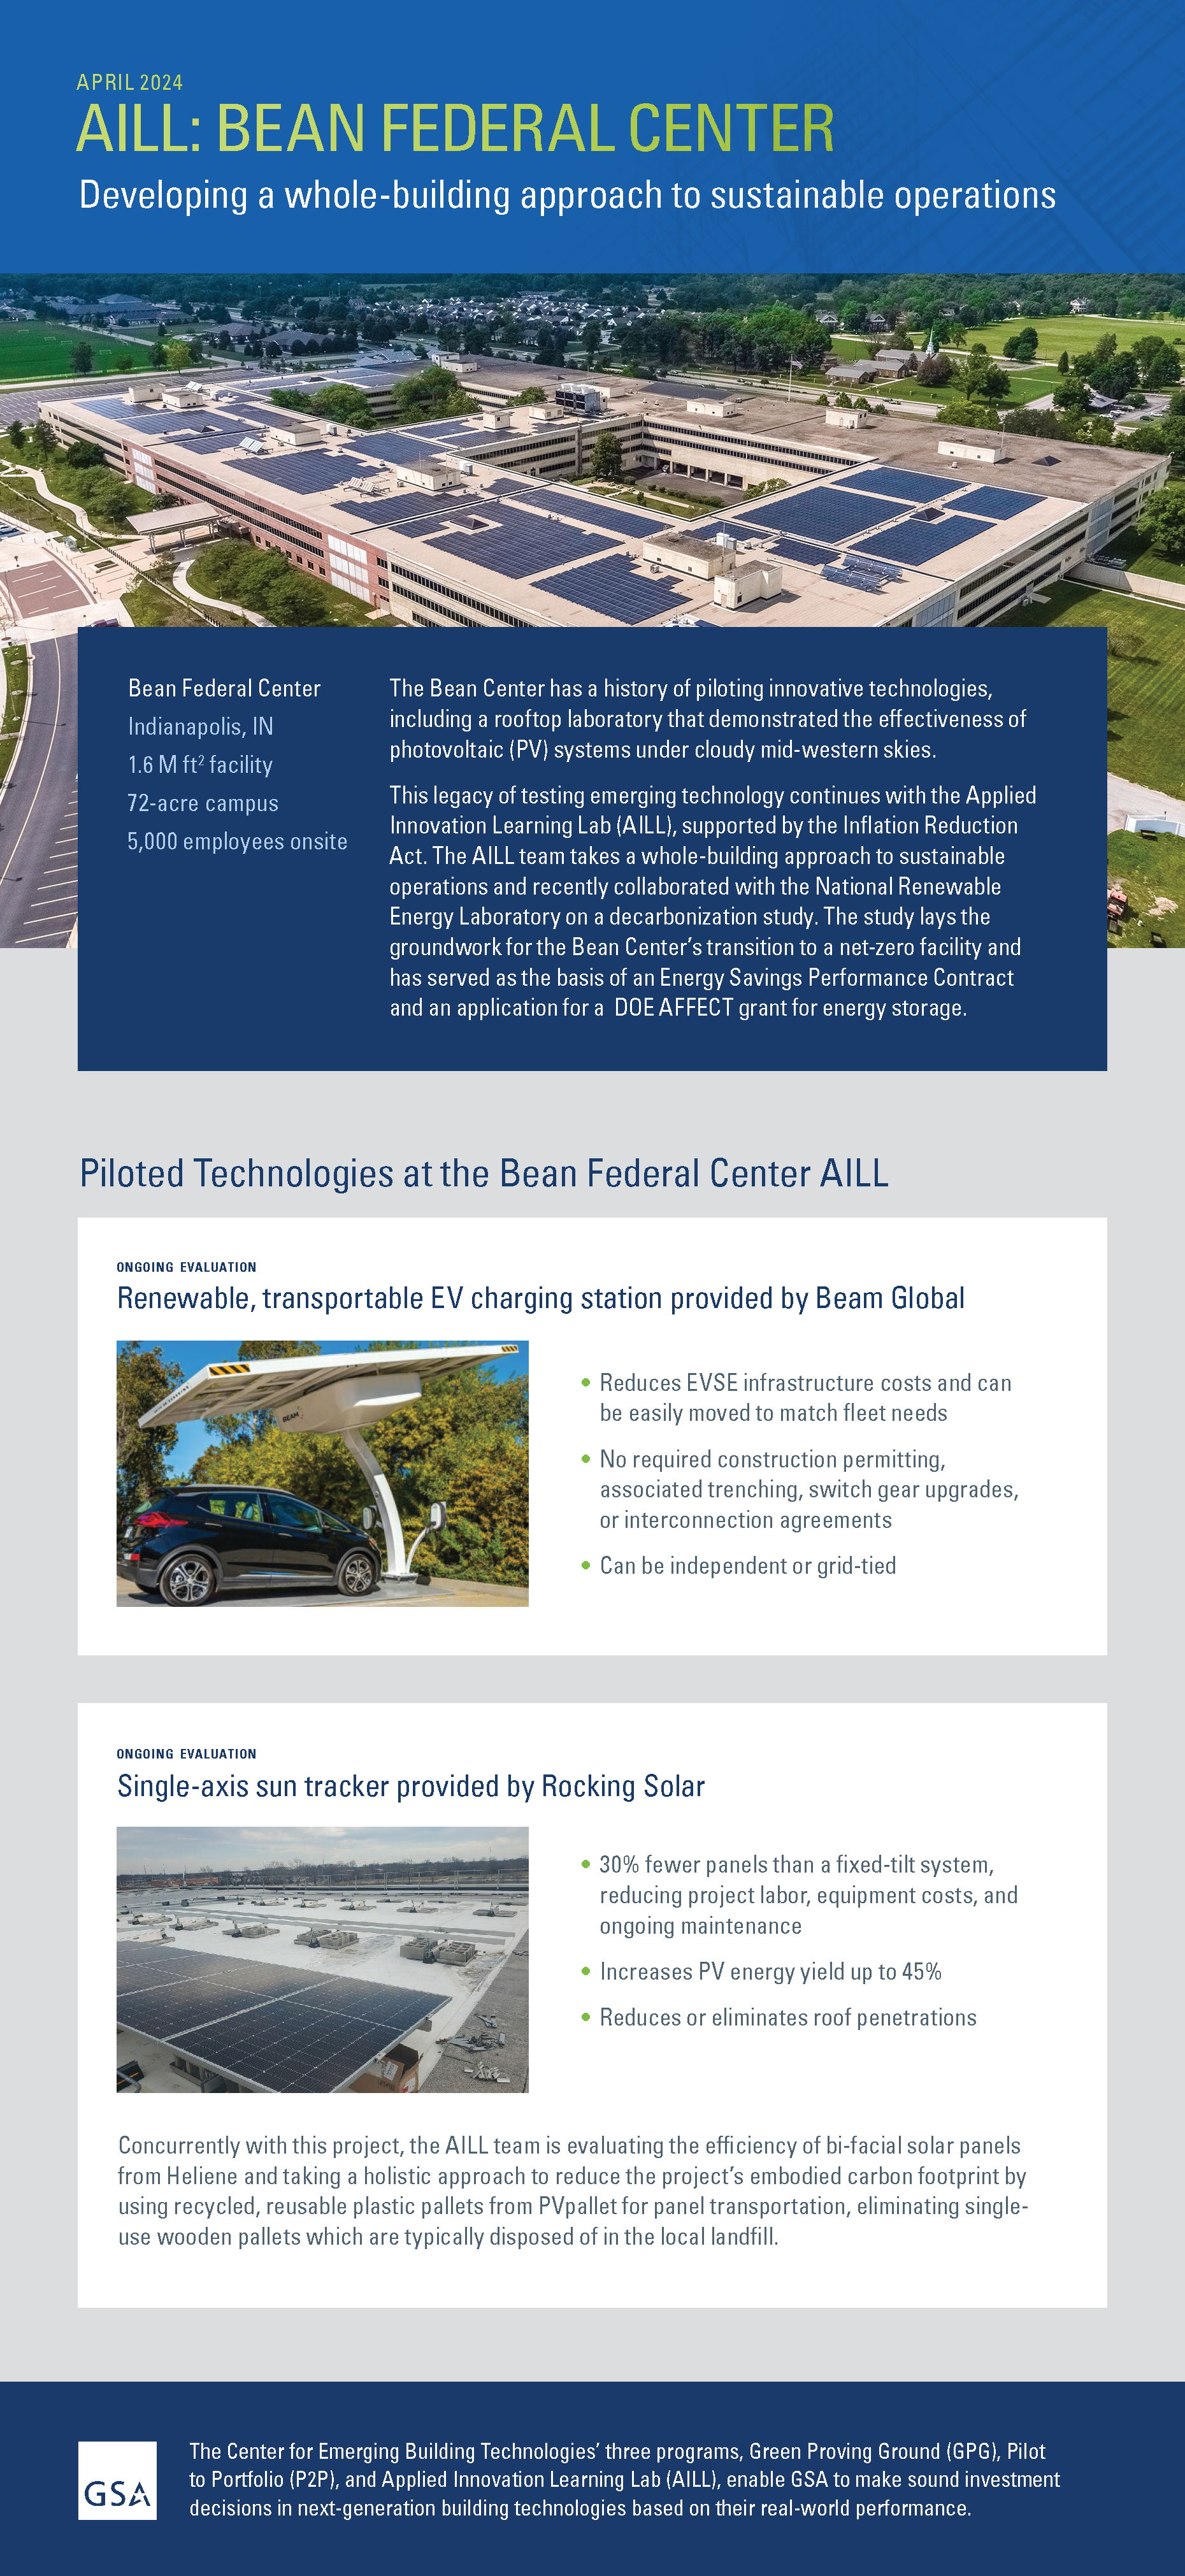 Download a PDF version of the full-size AILL: Bean Federal Center infographic.